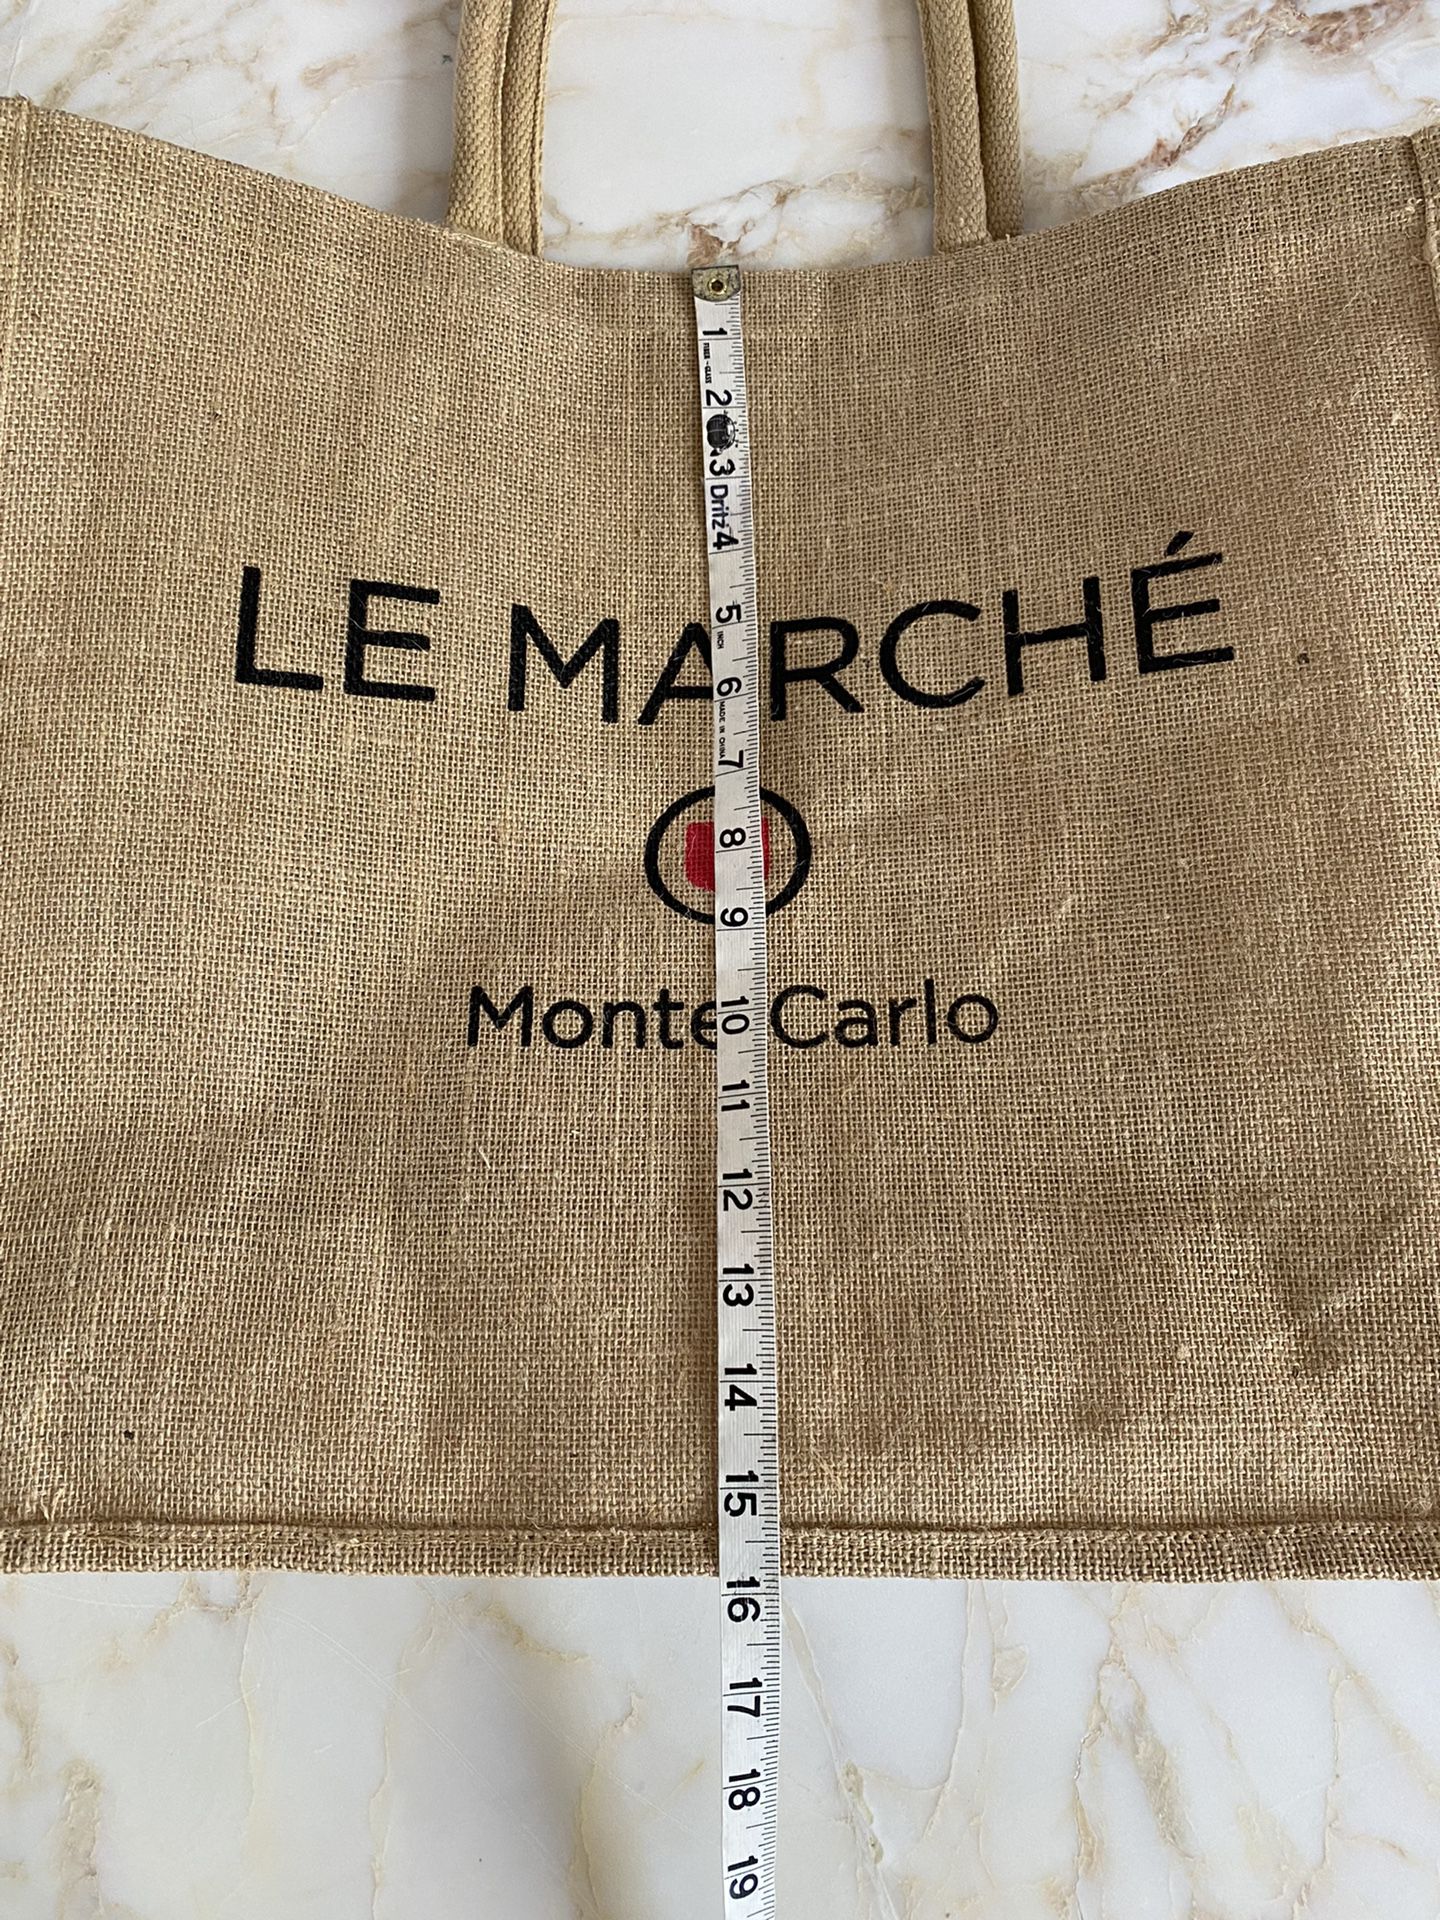 Large jute tote bag from the eponymous supermarket in Monte Carlo